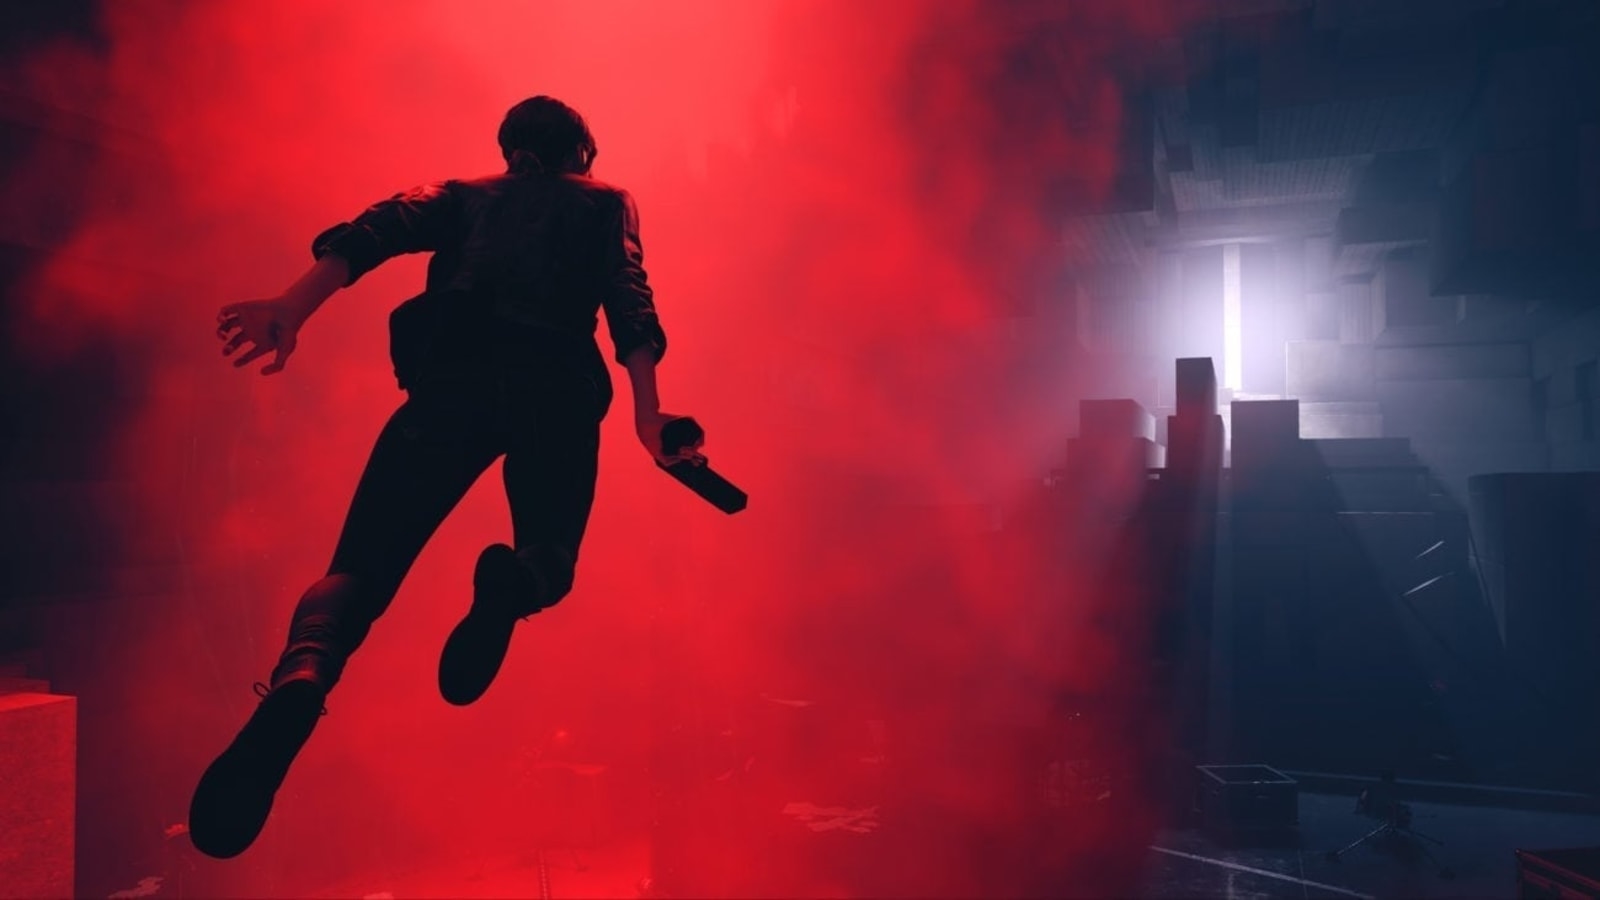 Remedy is remaking the first two Max Payne games for PC, PS5 and Xbox Series X/S | DeviceDaily.com